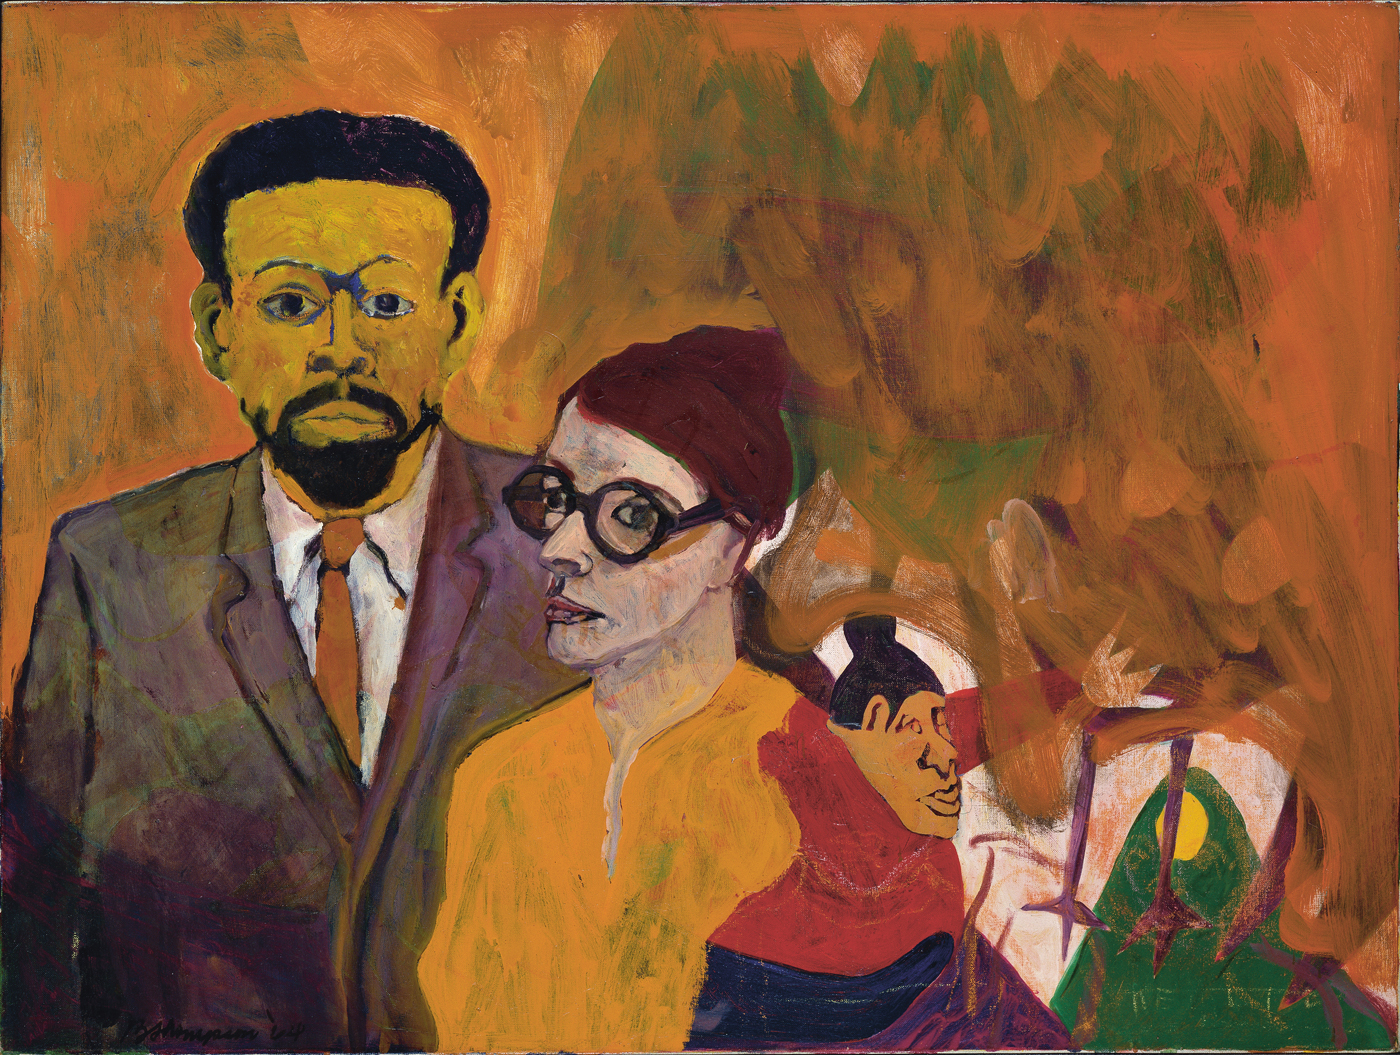 Bob Thompson, "Le Roi Jones and his Family" (1964), oil on canvas, Hirshhorn Museum and Sculpture Garden, Smithsonian Institution, Washington, DC (© Estate of Bob Thompson; Courtesy of Michael Rosenfeld Gallery LLC, New York, NY; photo by Lee Stalsworth)